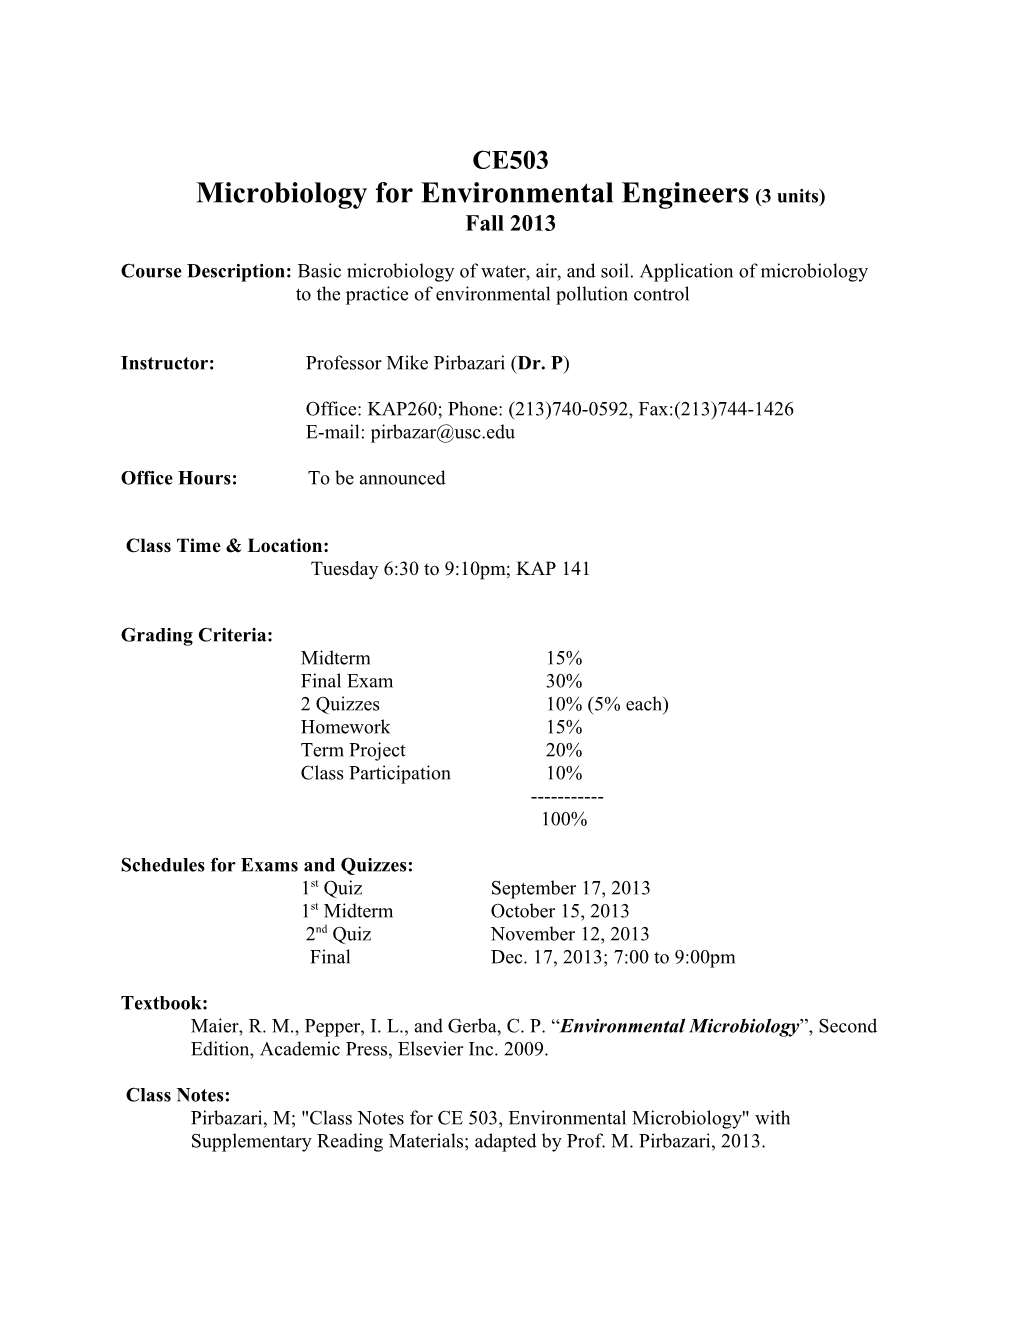 Microbiology for Environmental Engineers (3 Units)